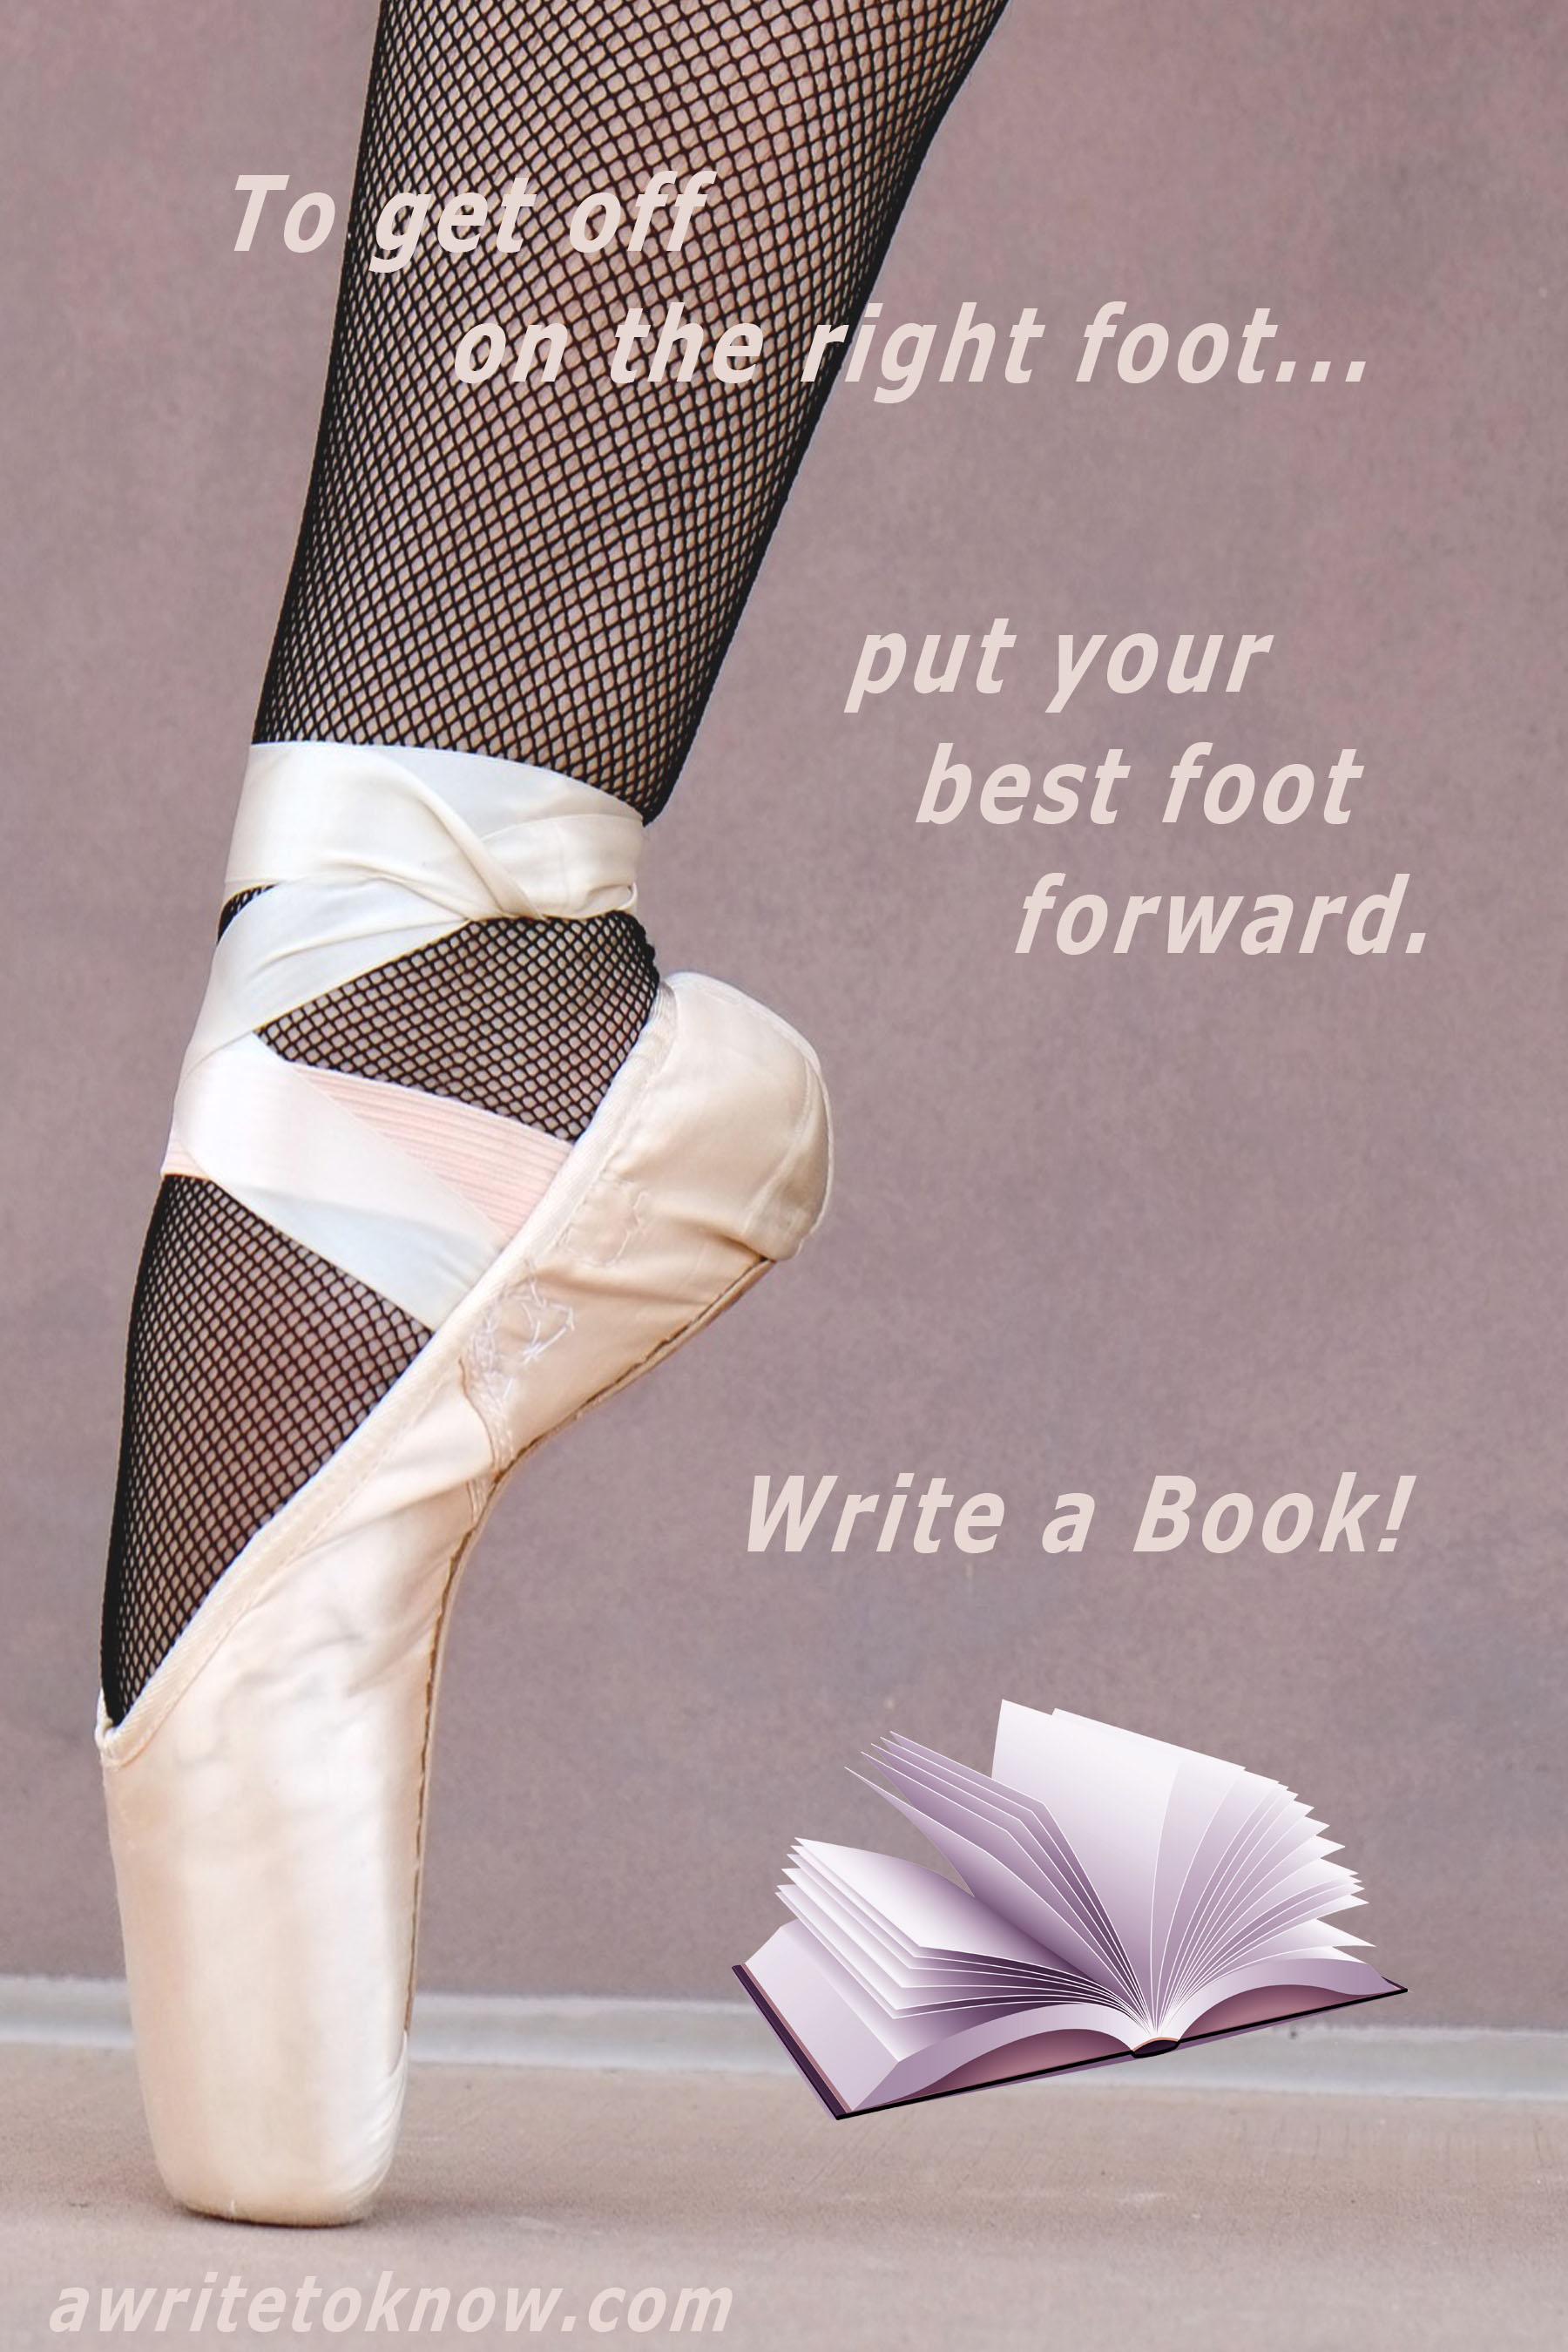 A ballerina’s foot stepping out to plant toes on floor, next to a book of blank pages, with the words “Your book is a great way to put your best foot forward.”